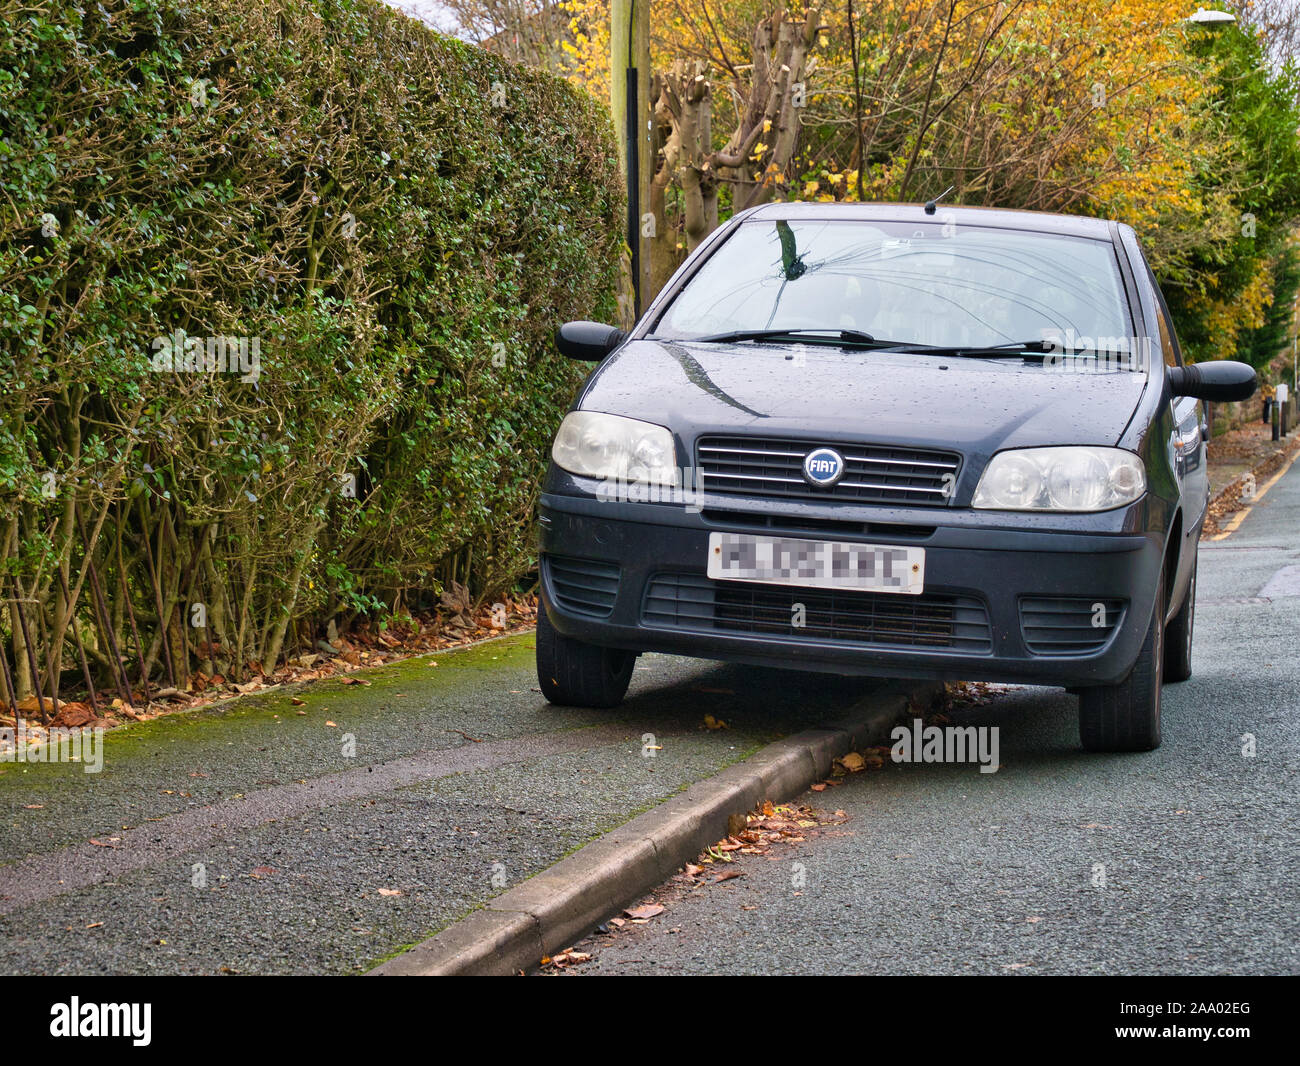 A car parks on the pavement / sidewalk, restricting space for pedestrians - taken in the UK. Stock Photo